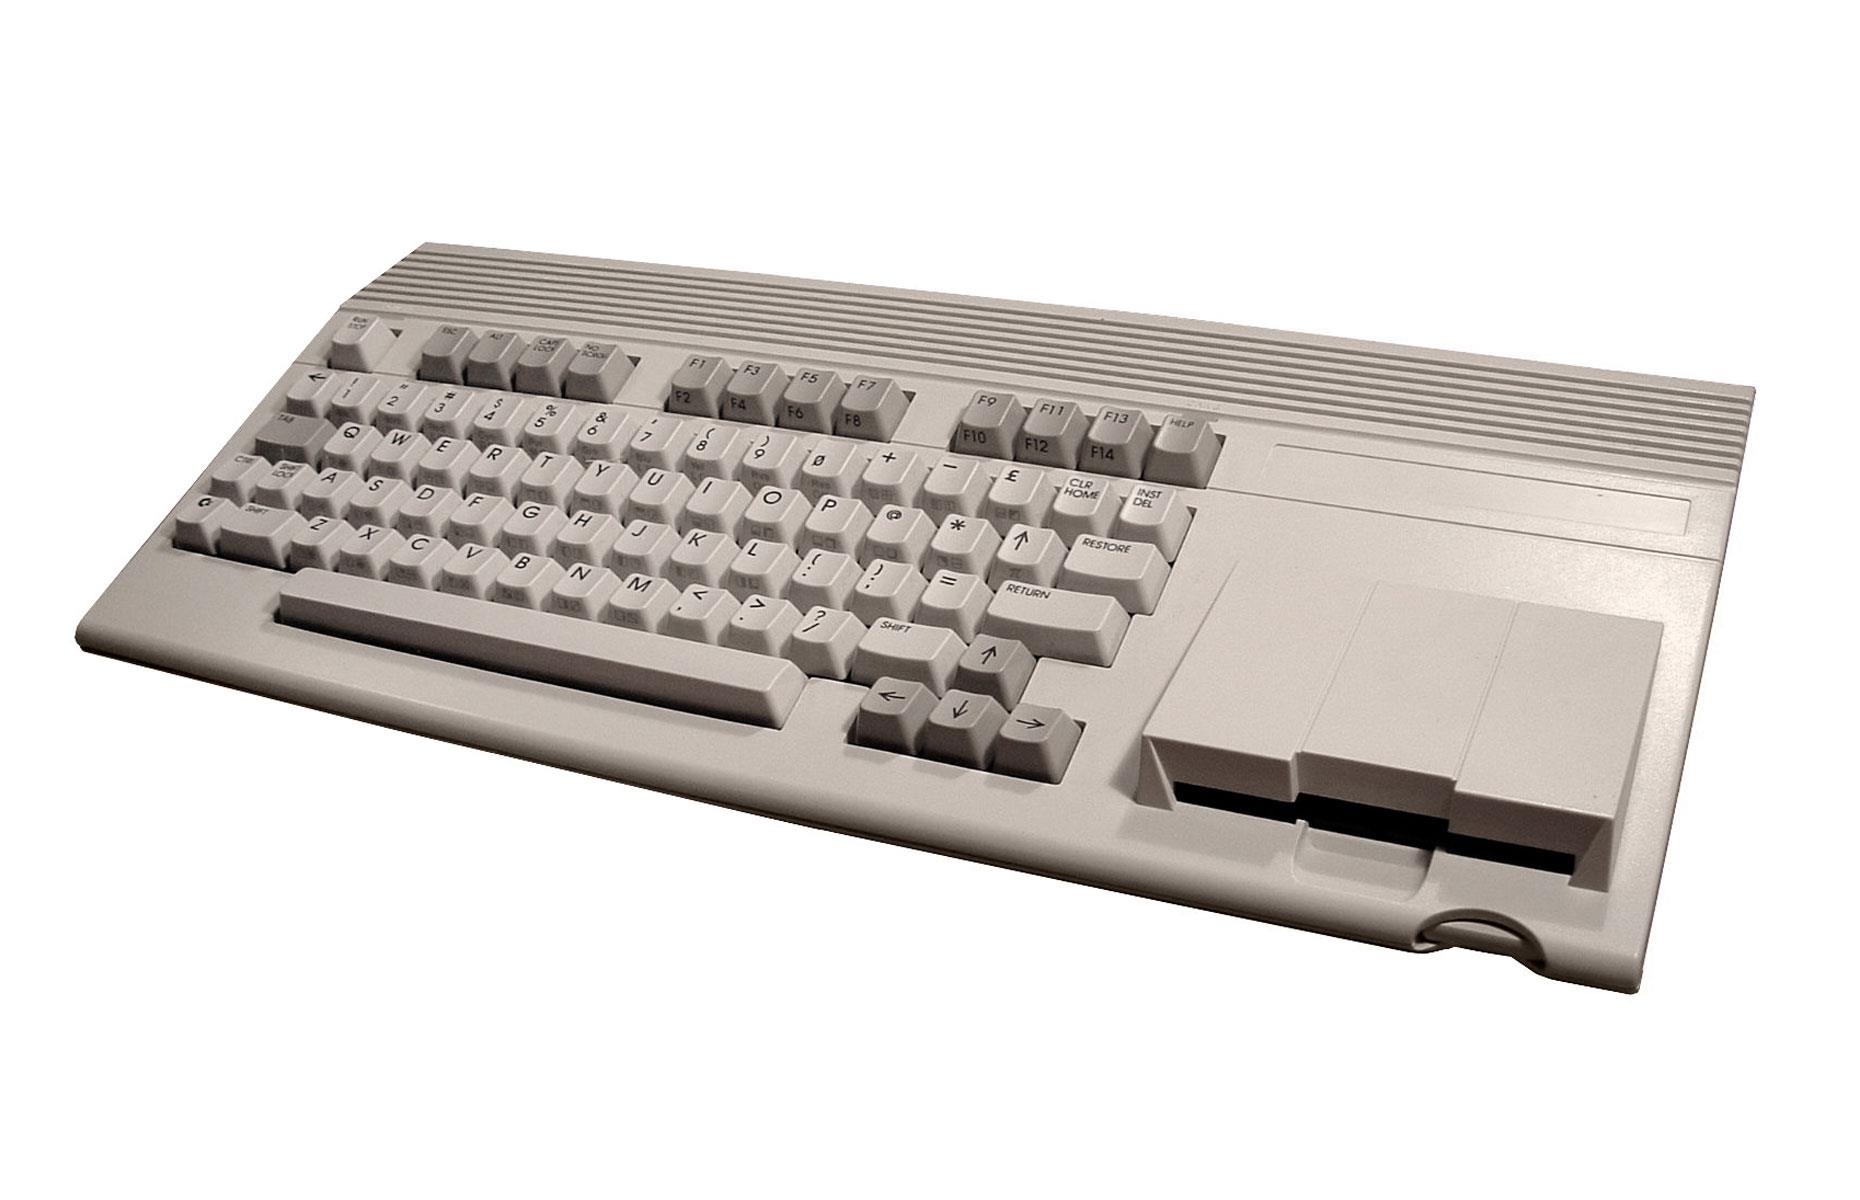 Commodore 65: up to $70,000 (£56,288)